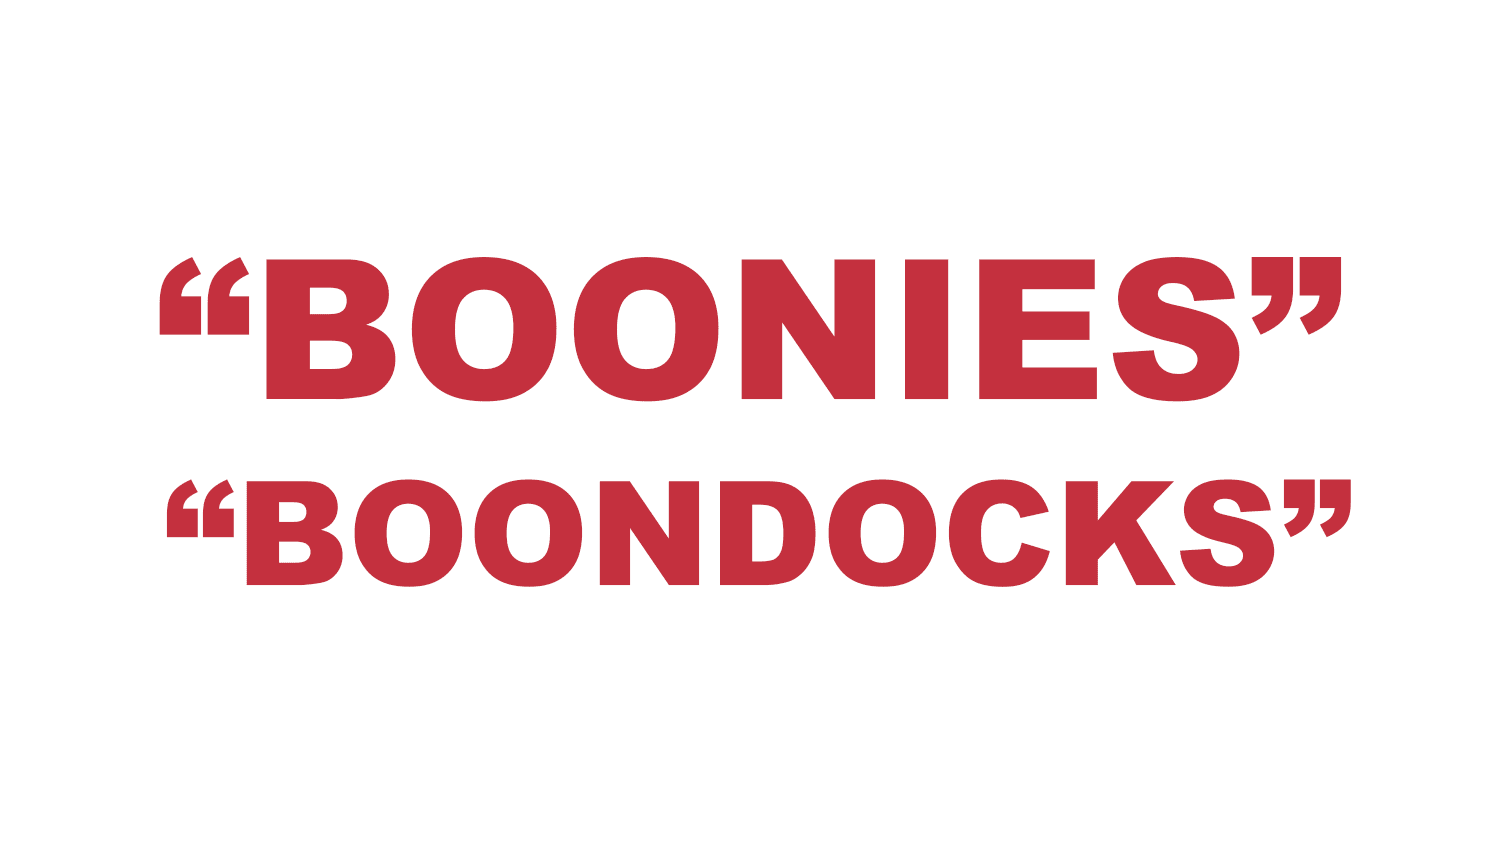 What does "Bonnies" and "Boondocks" mean?